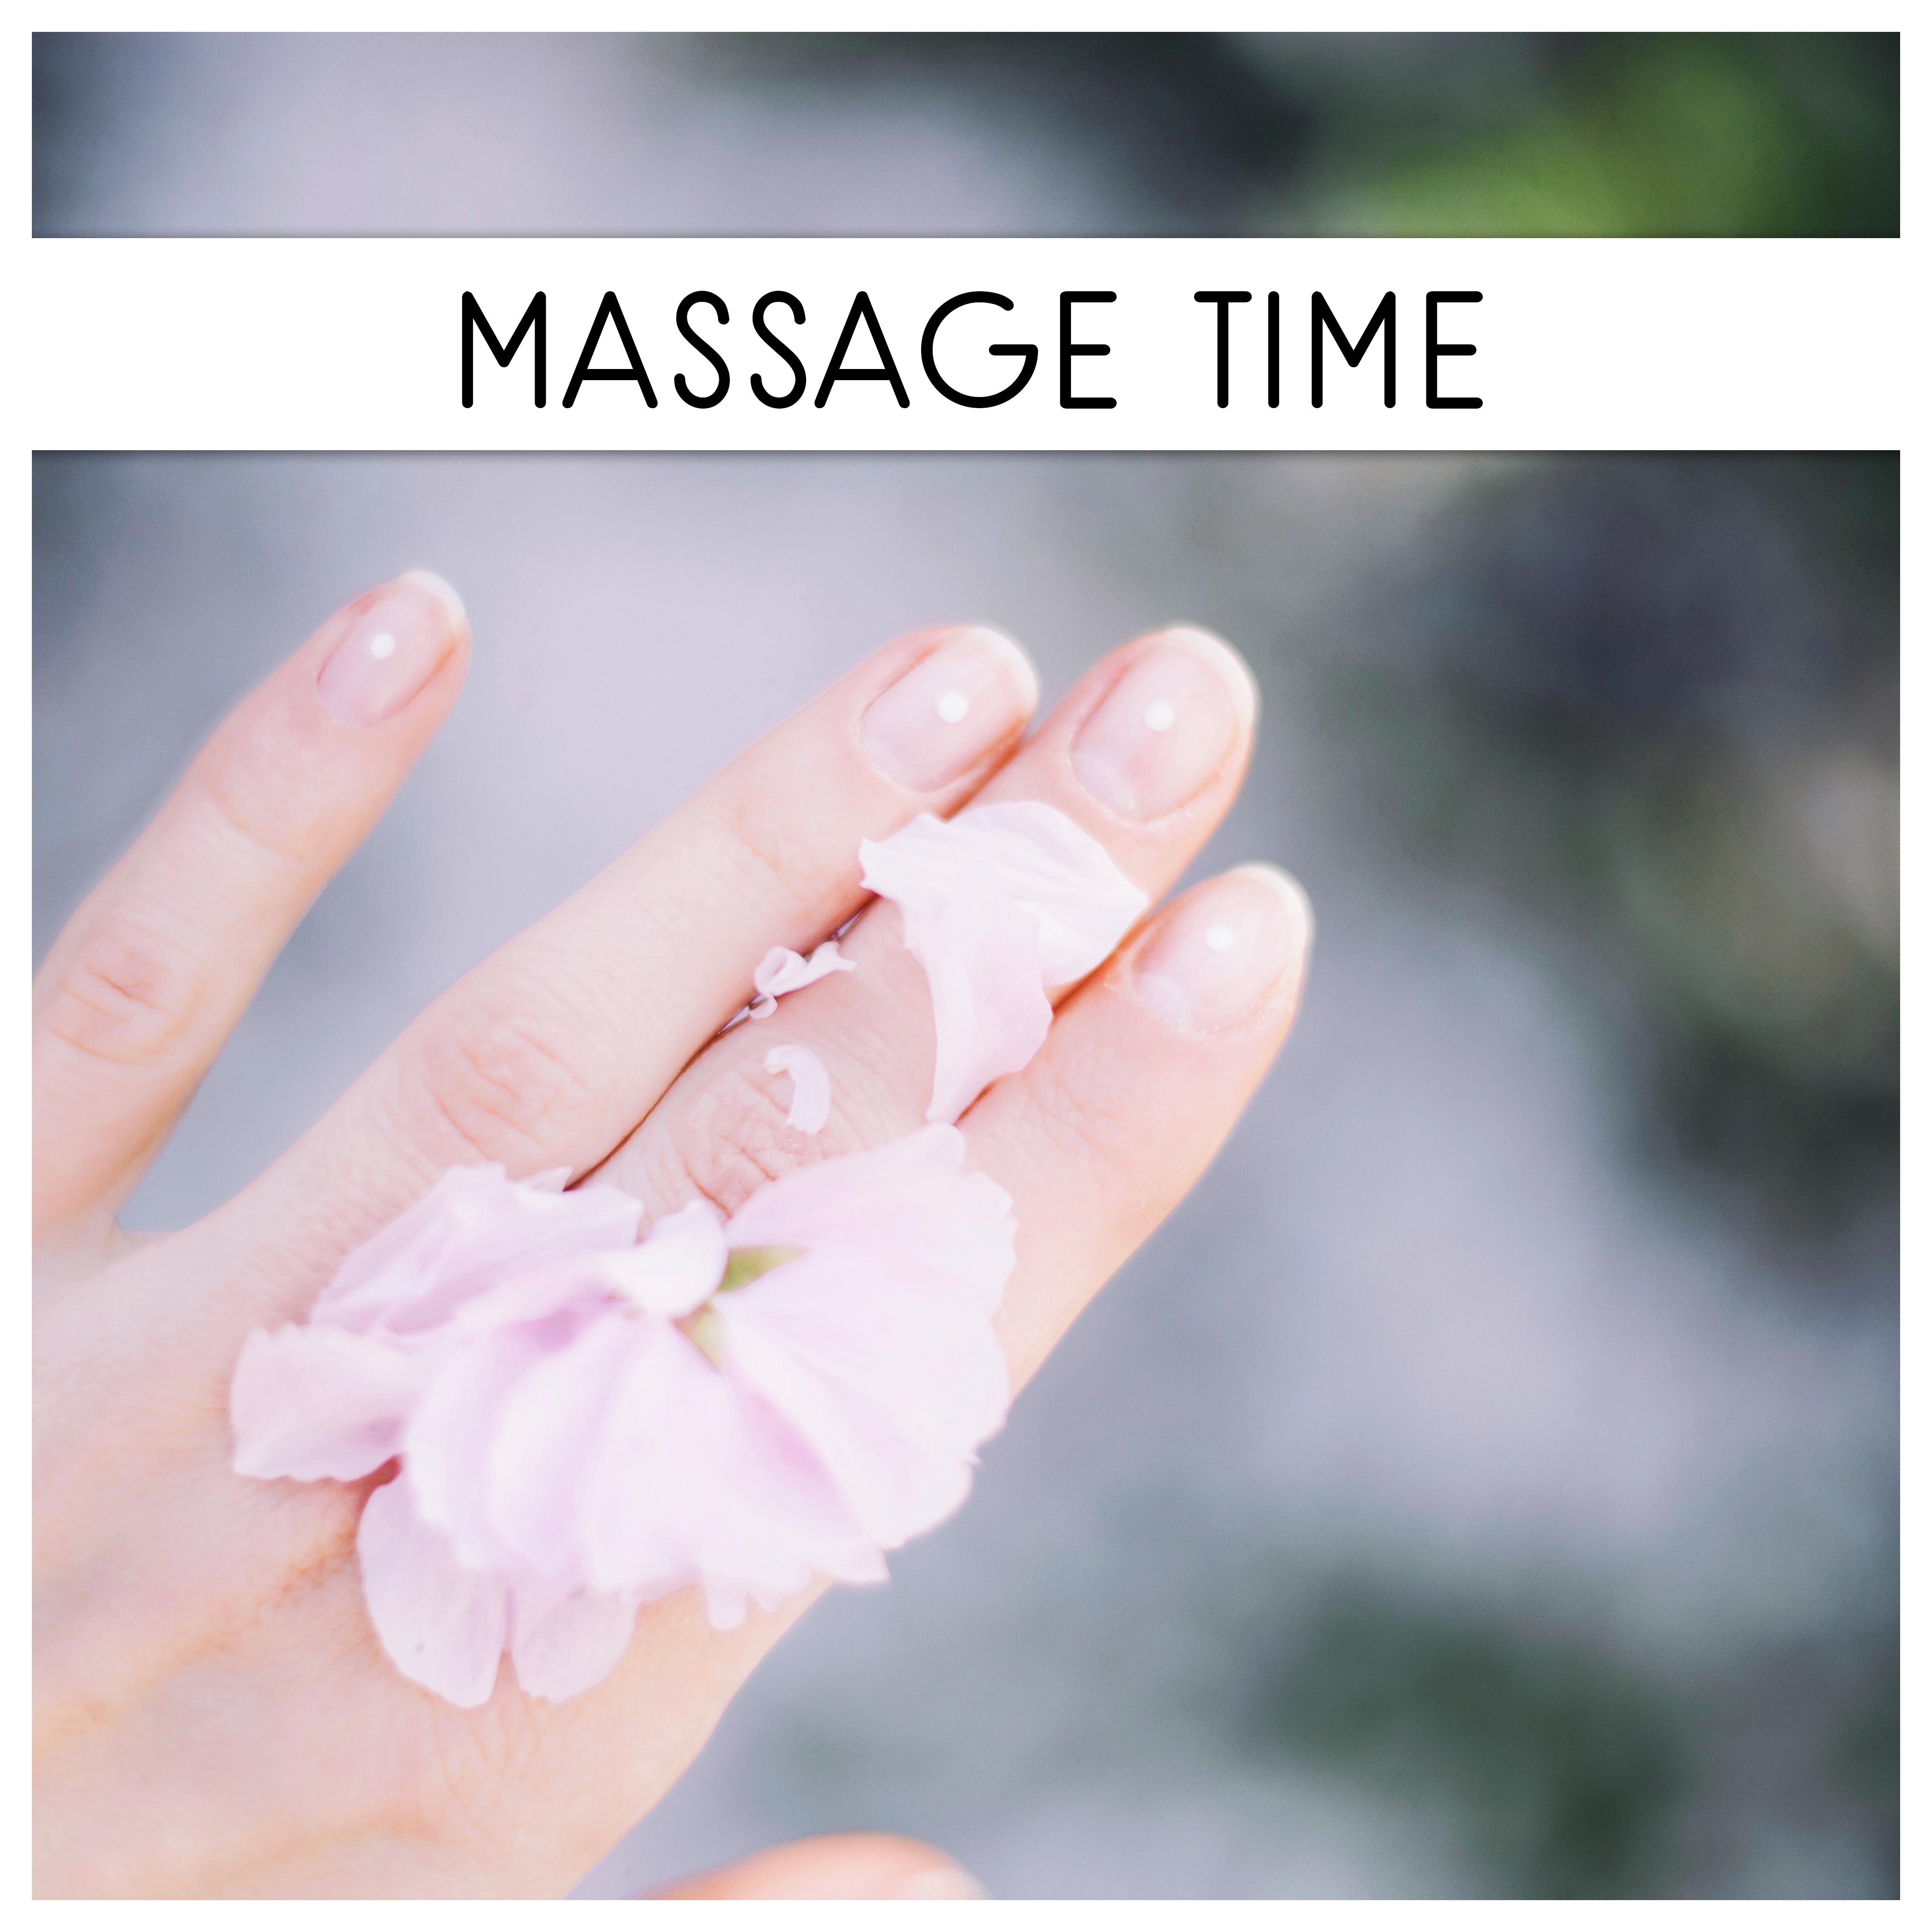 Massage Time – Calming New Age Music for Spa & Wellness, Massage, Beauty Lounge, Deep Relaxation